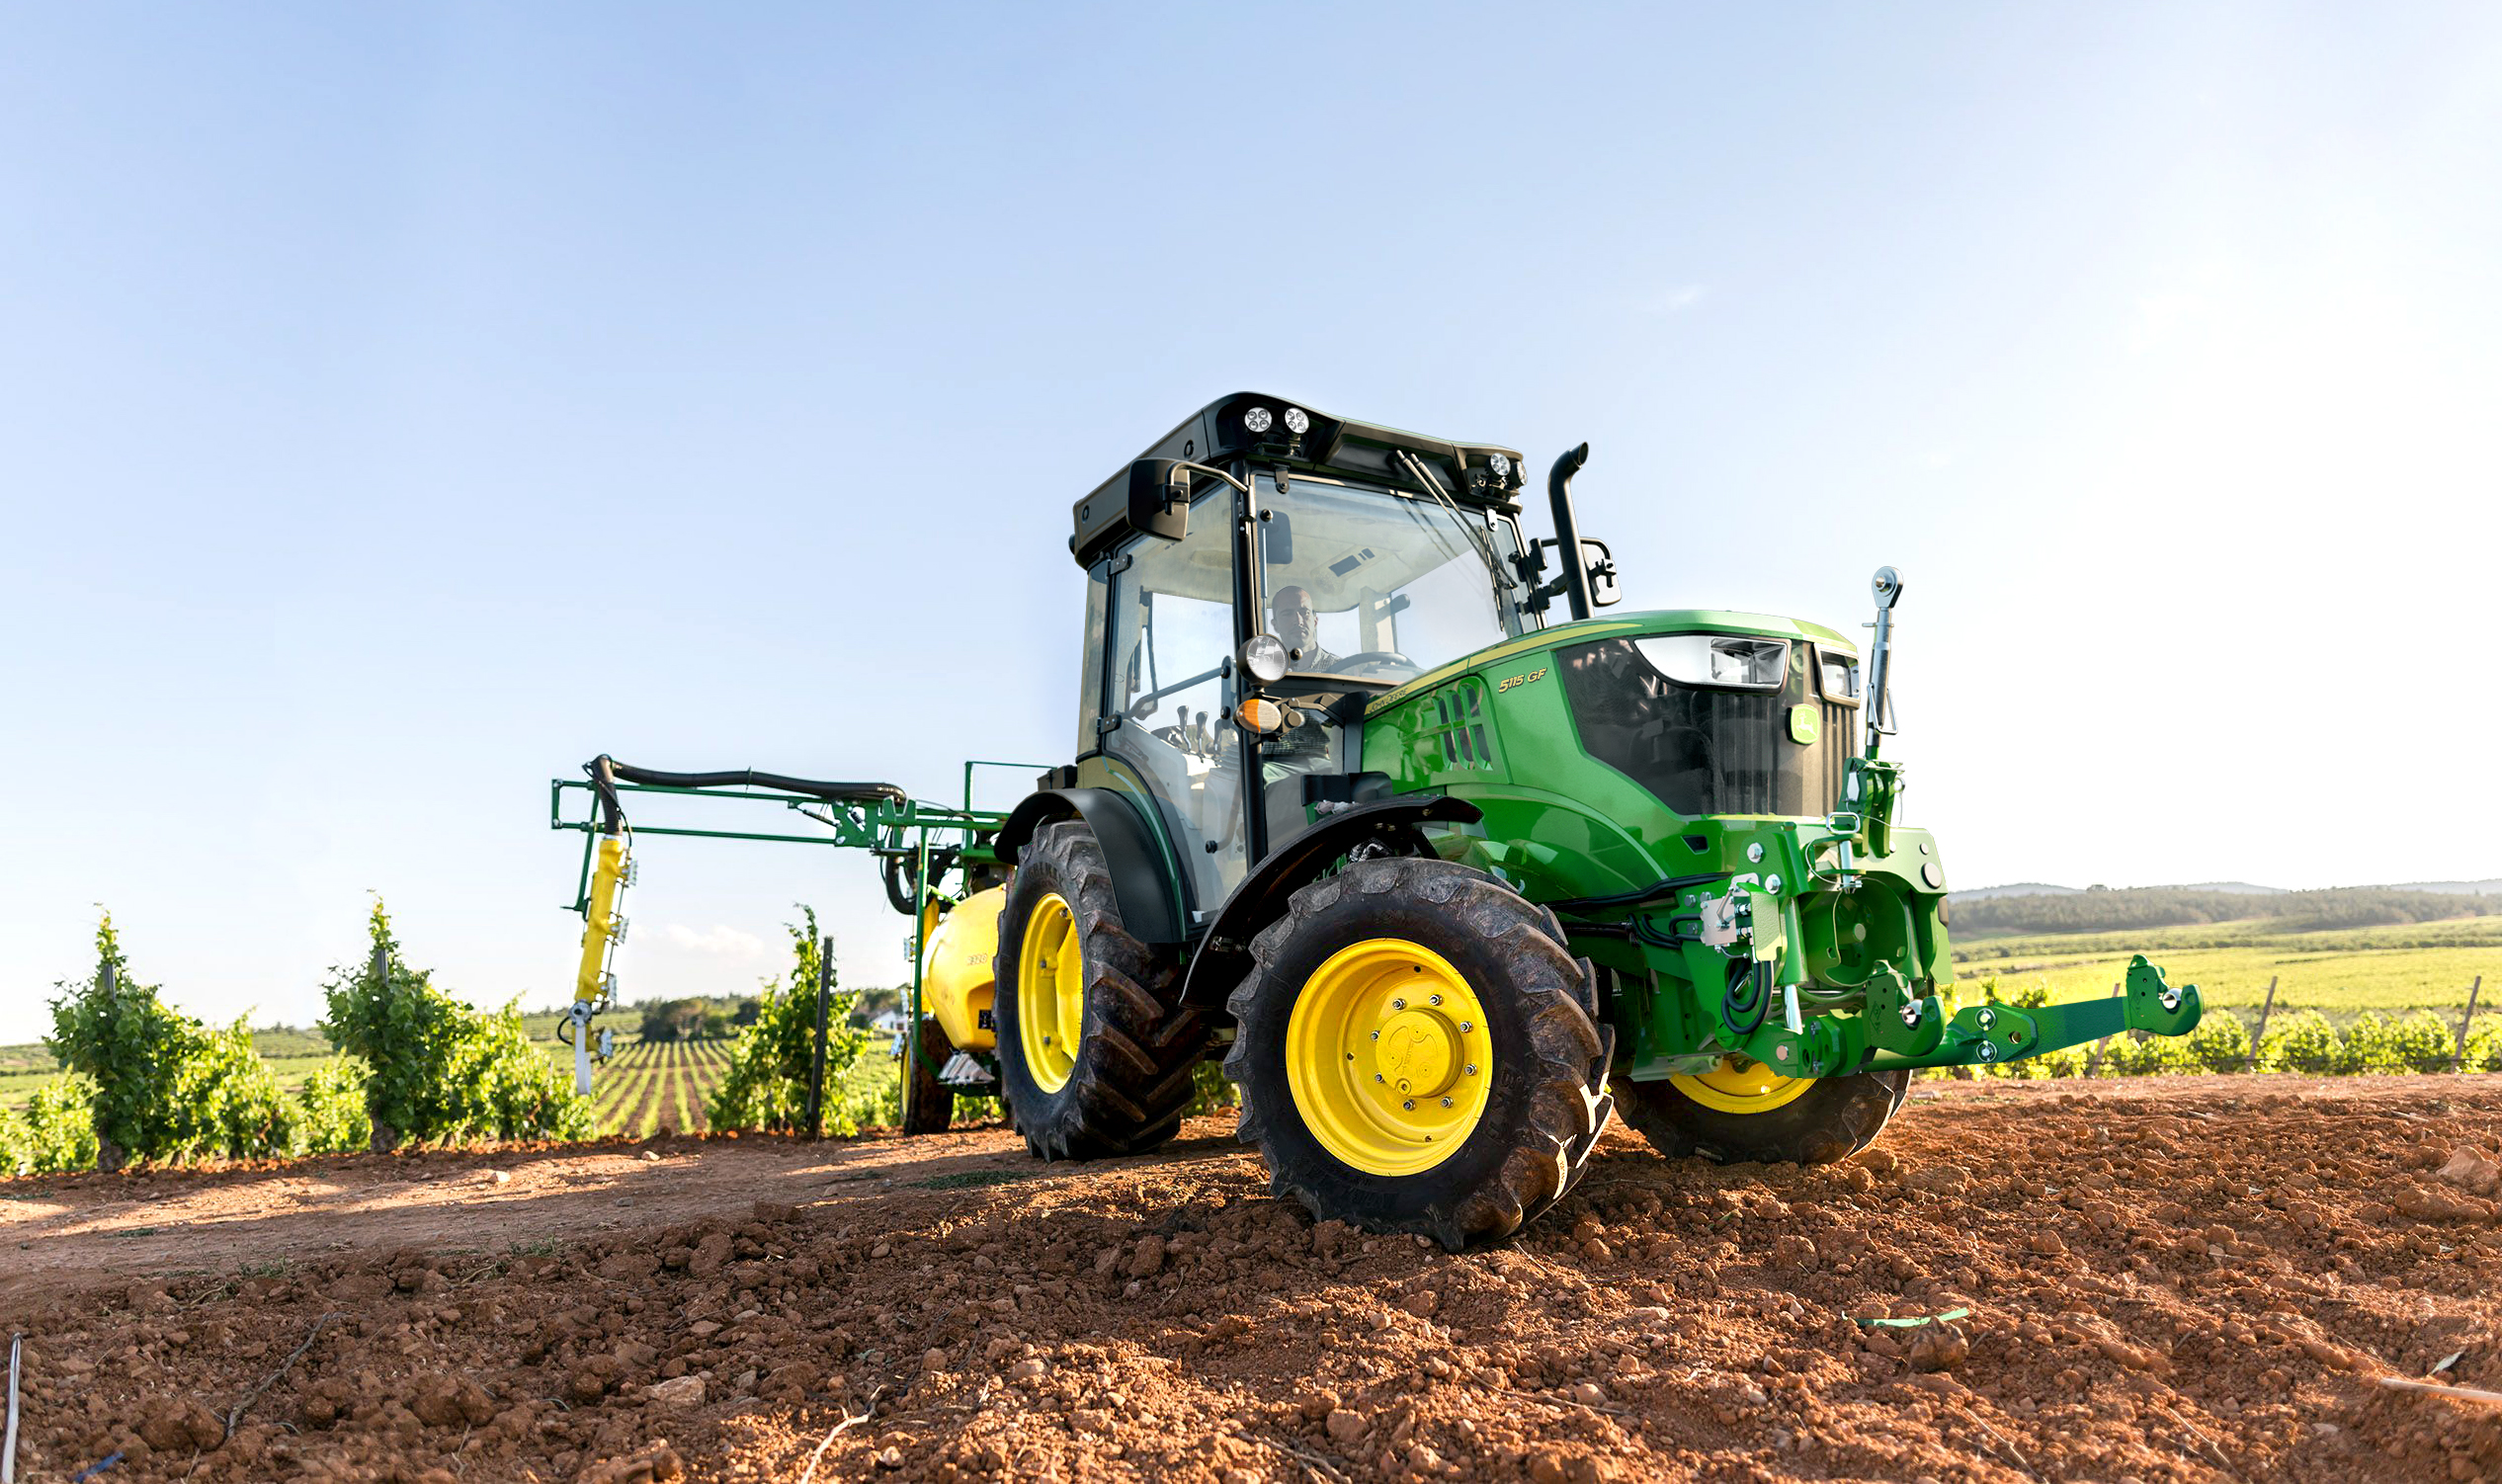 More comfort and power for specialty tractors